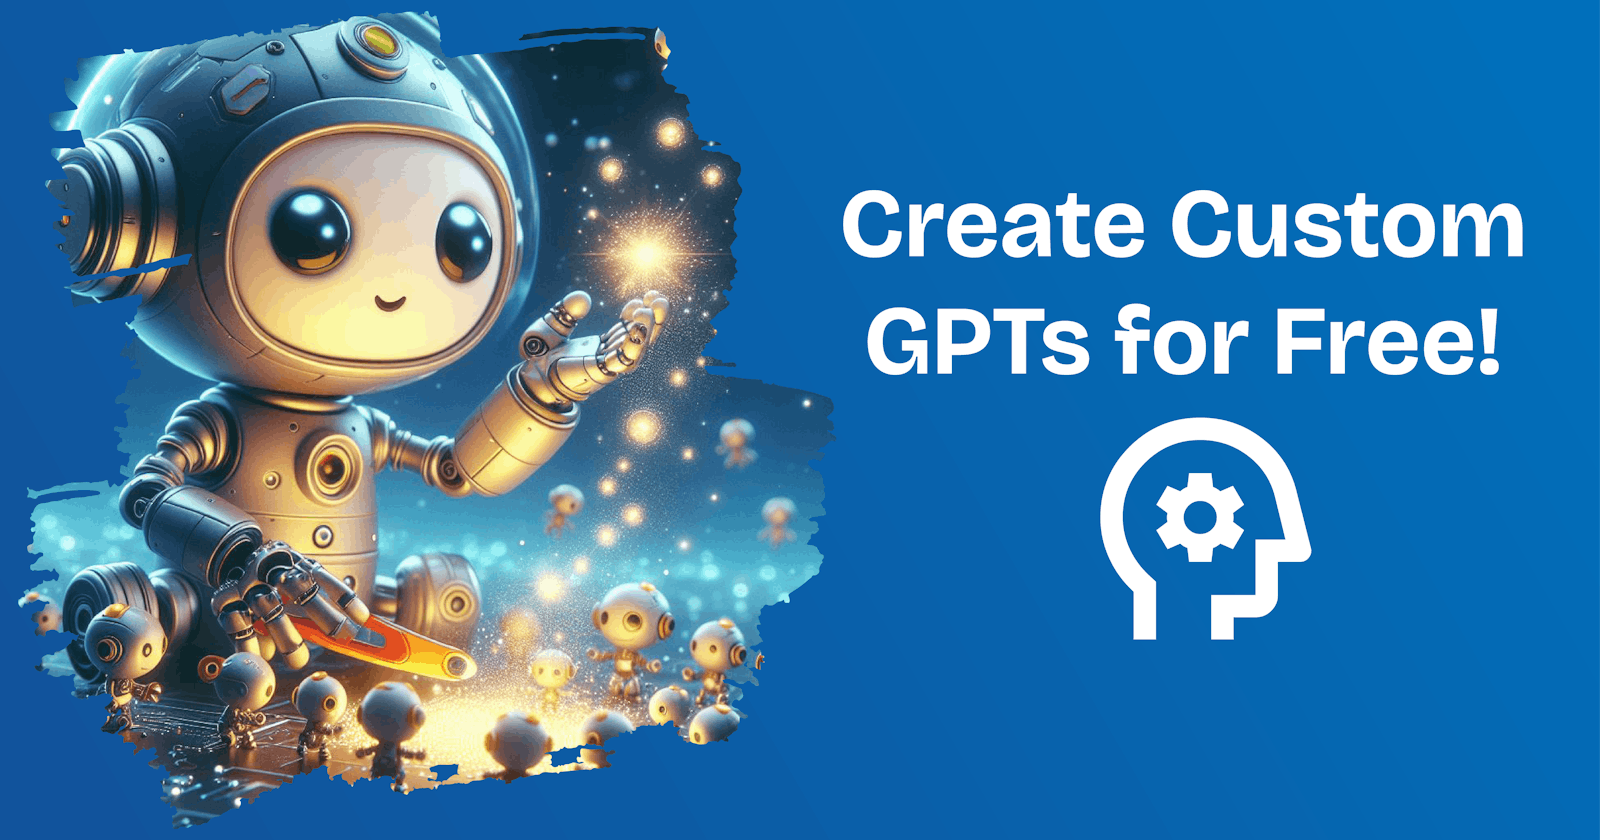 Create Your Custom GPTs for Free!